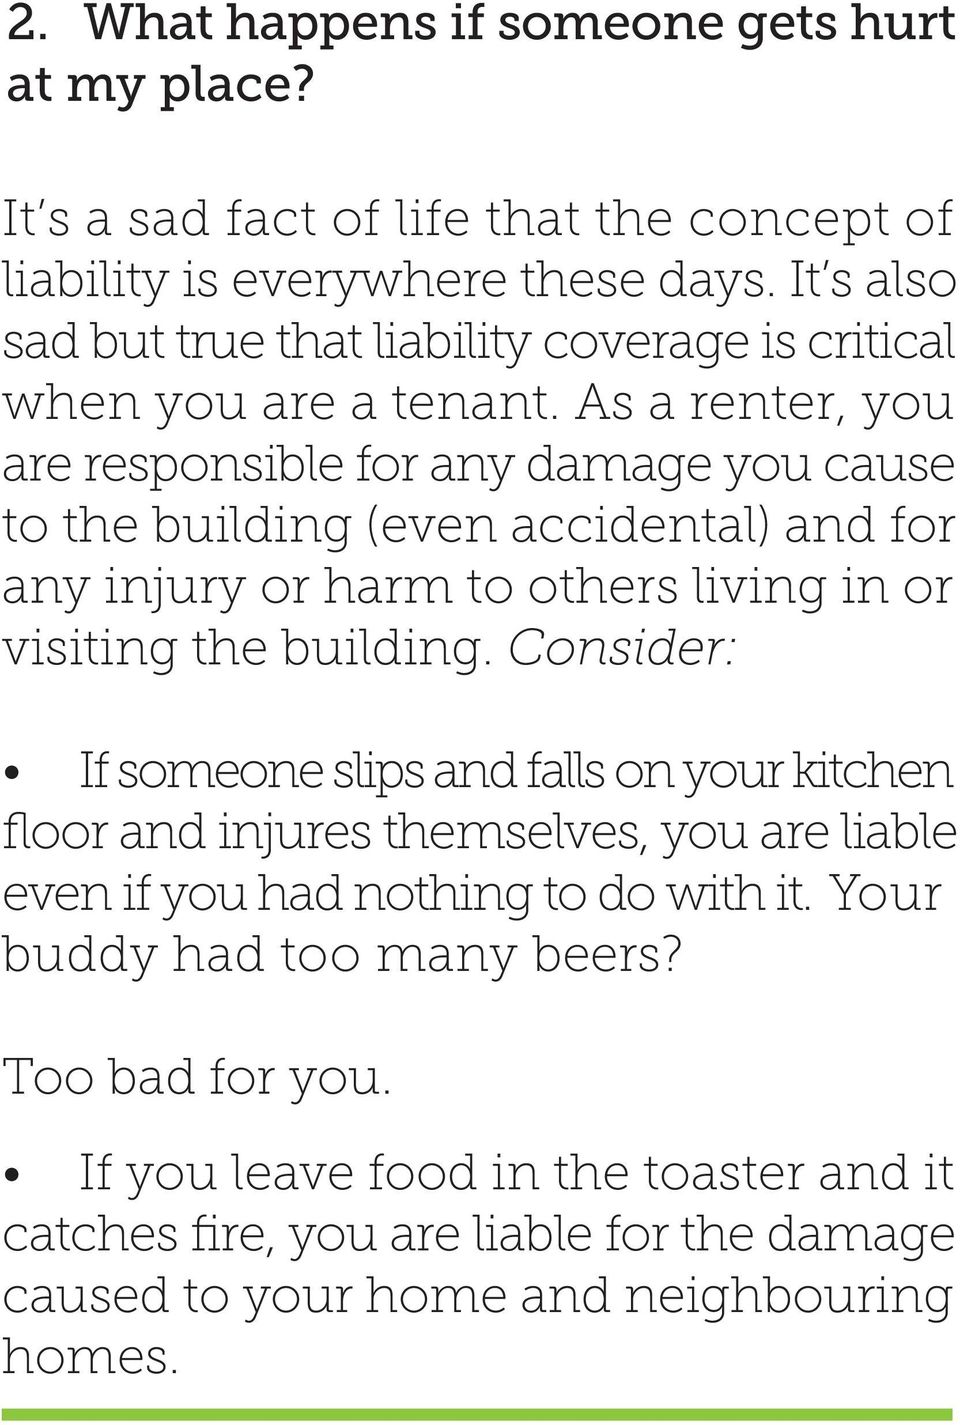 As a renter, you are responsible for any damage you cause to the building (even accidental) and for any injury or harm to others living in or visiting the building.